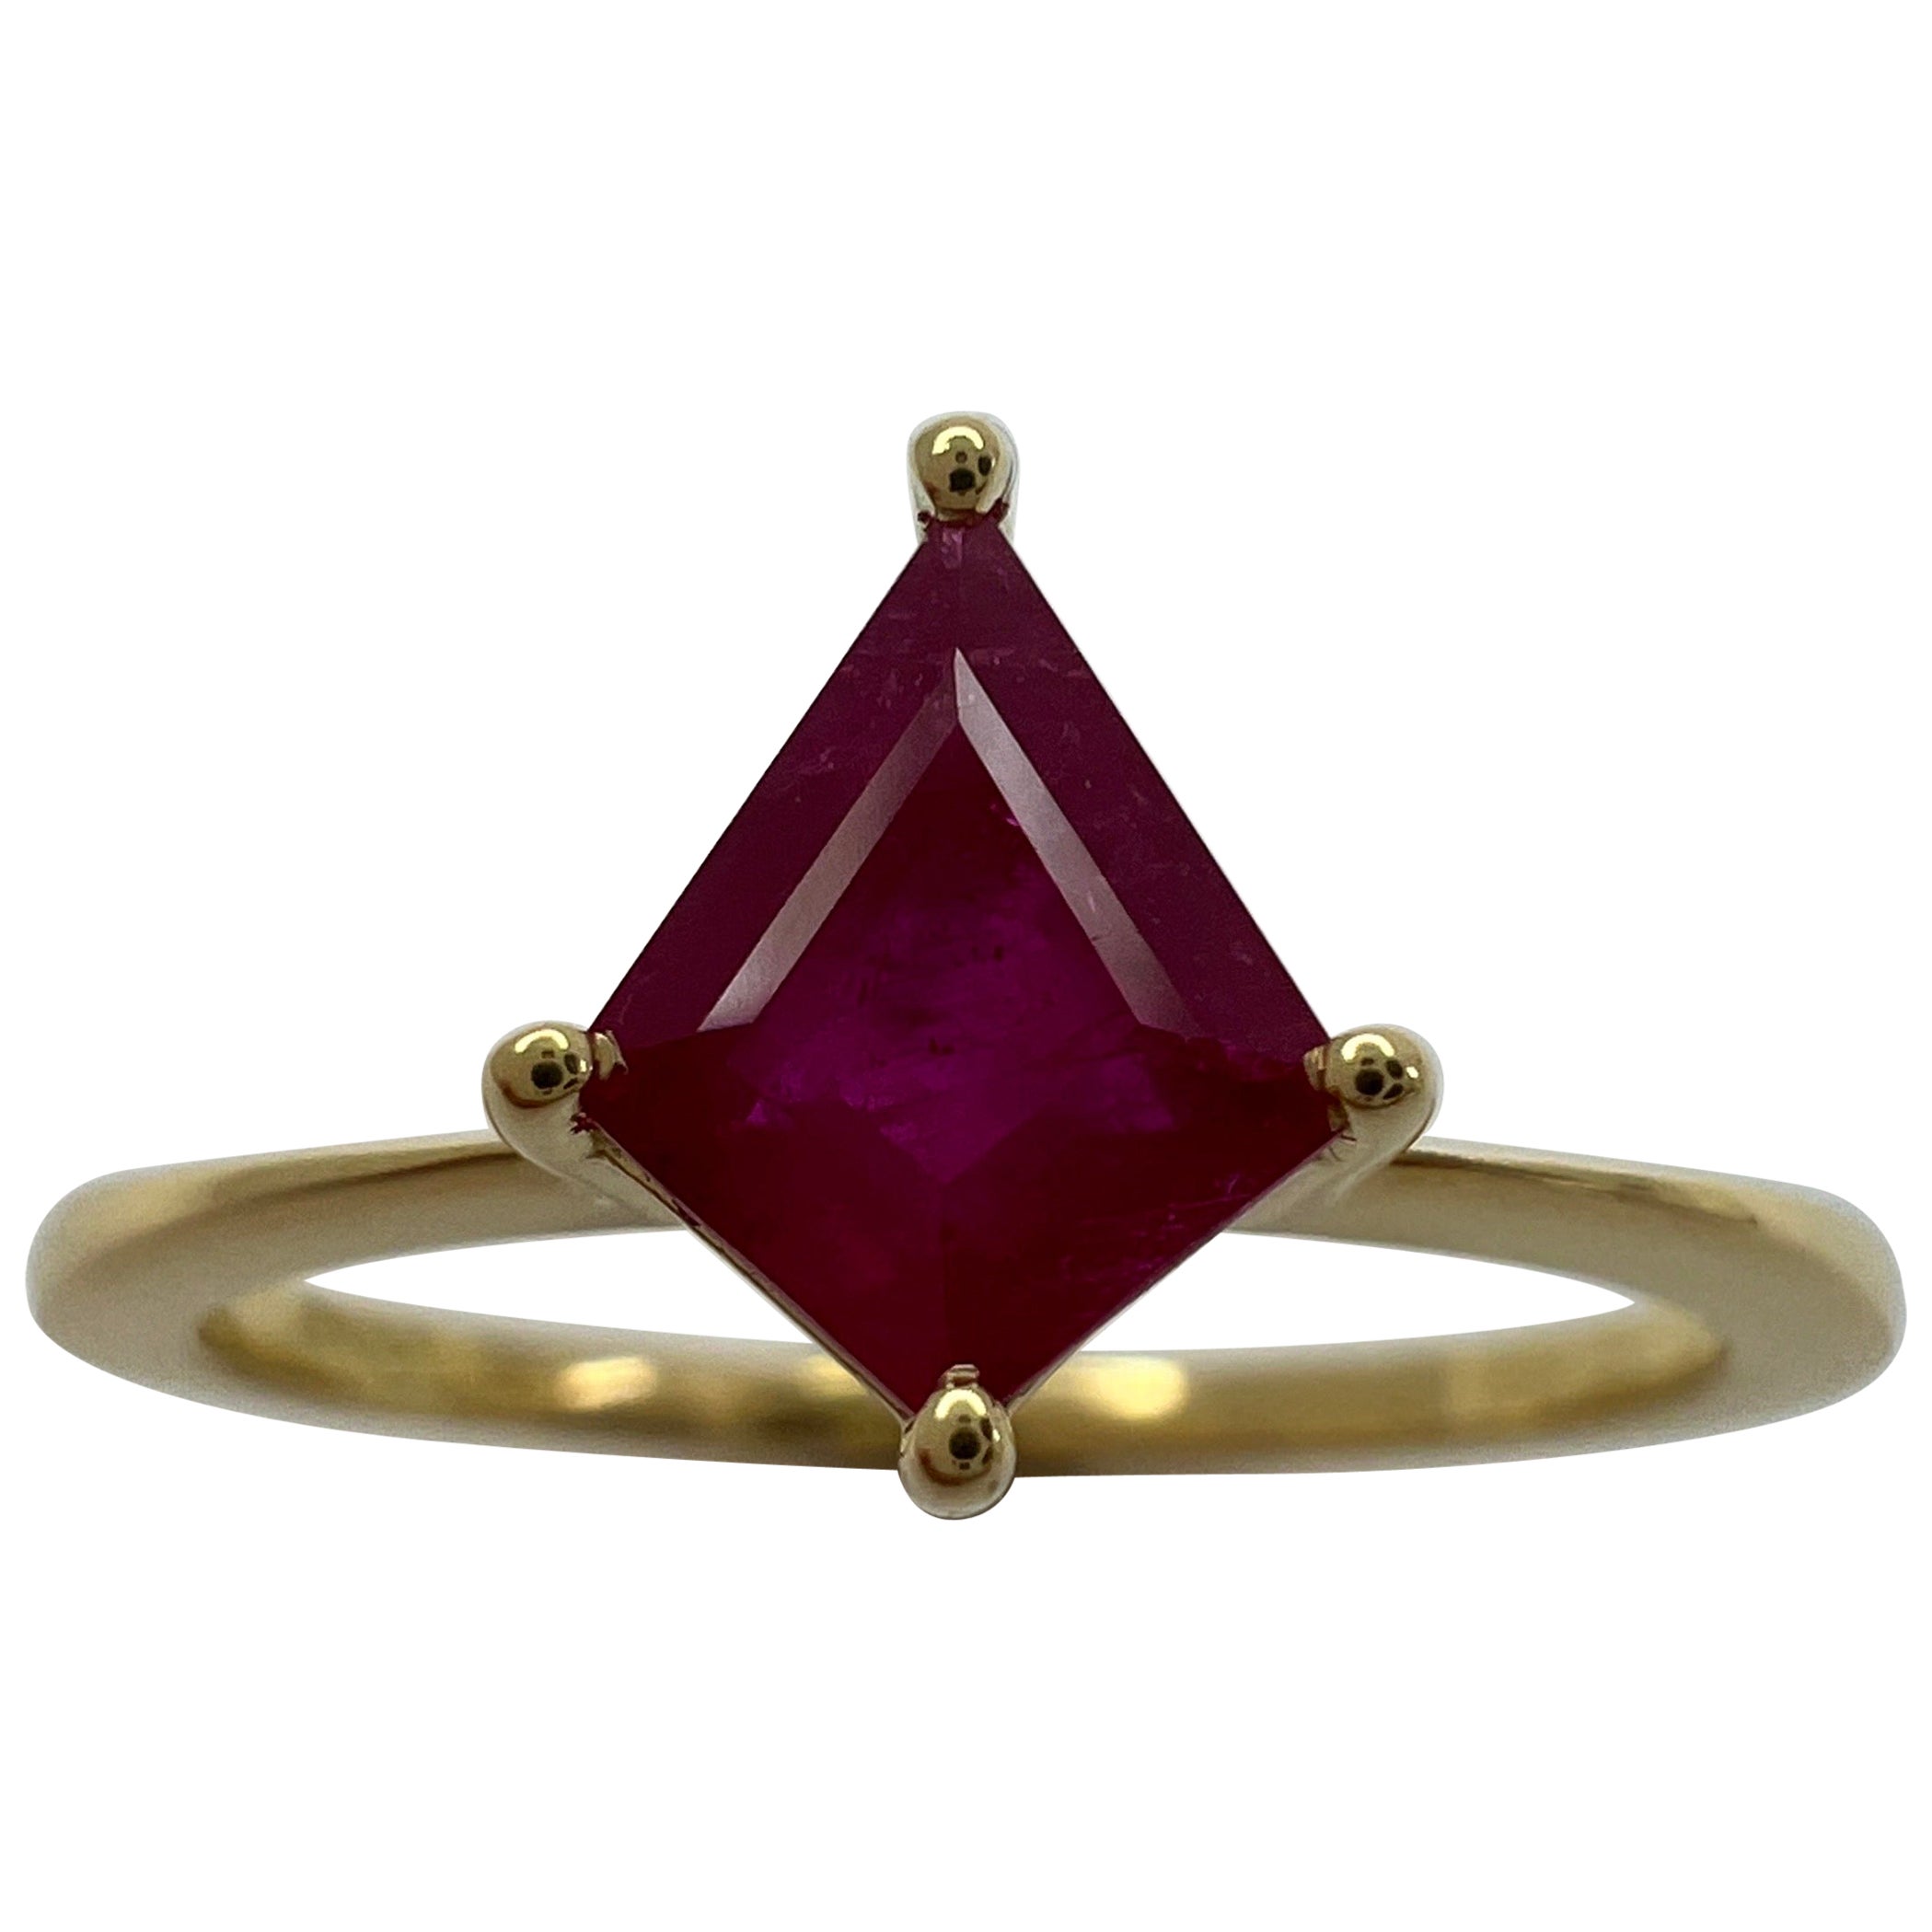 0.73 Carat Pinkish Red Ruby Fancy Kite Cut 18k Yellow Gold Modern Solitaire Ring